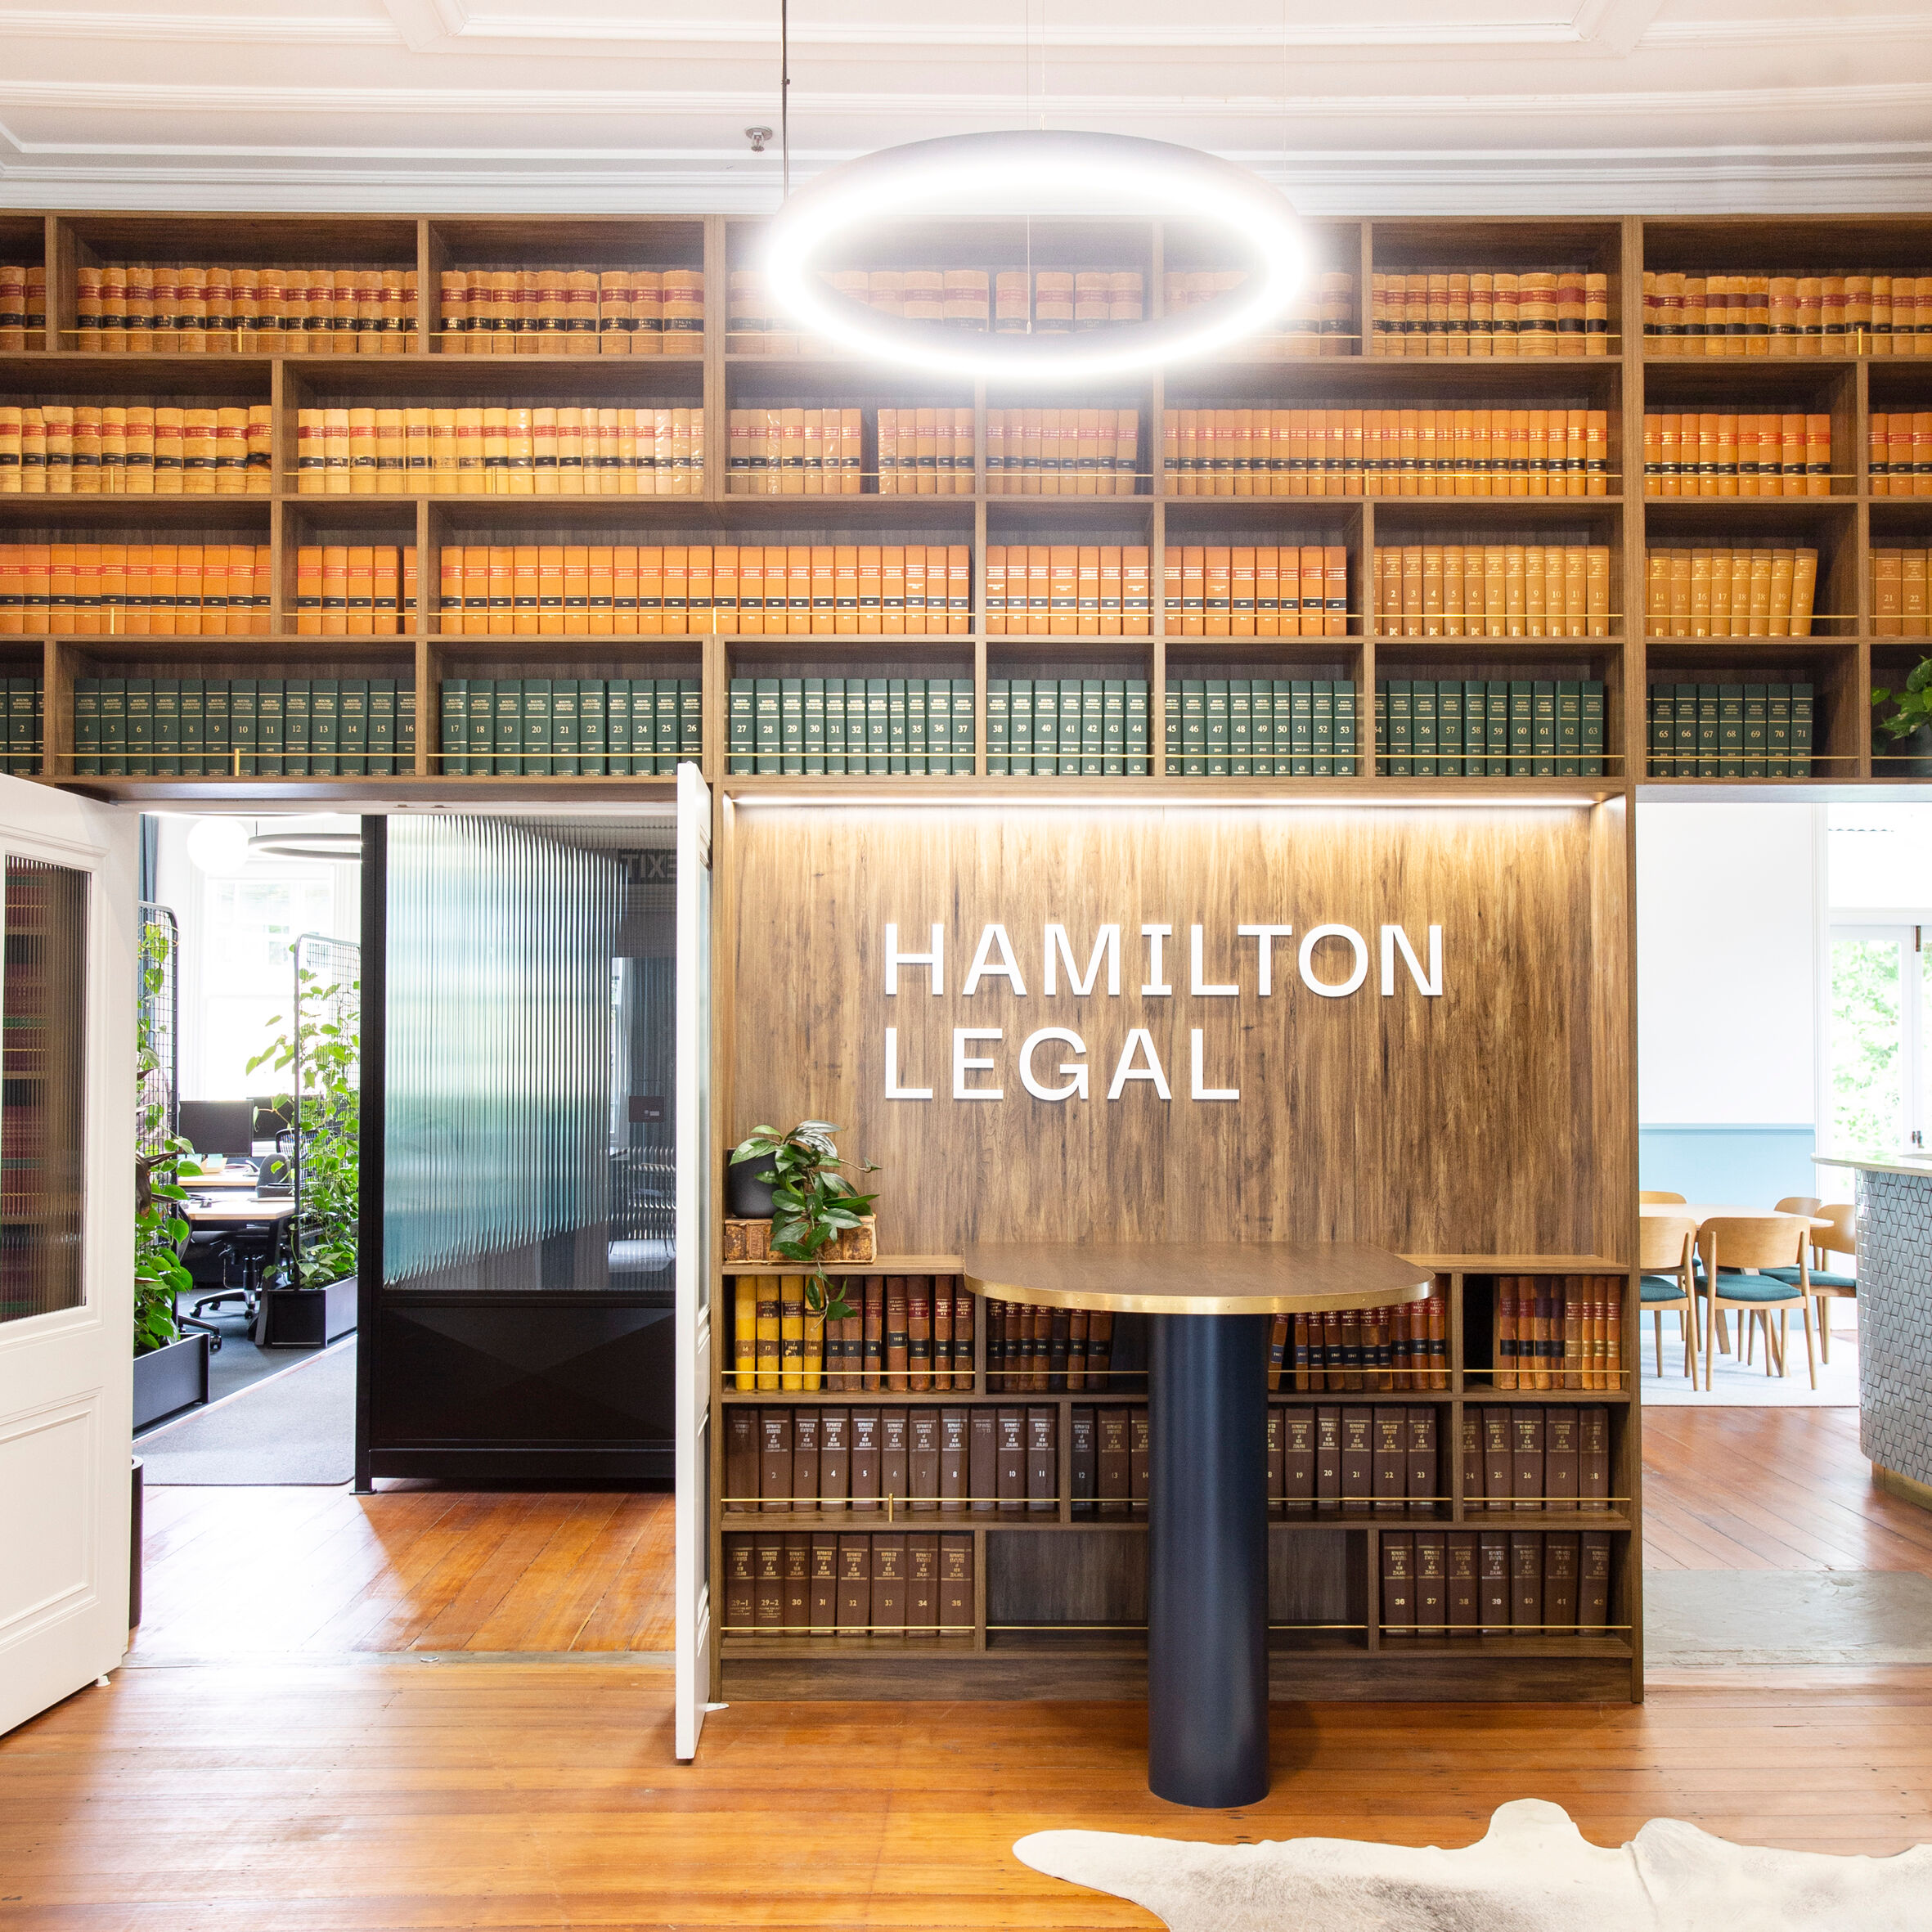 Hamilton Legal workspace fitout by Designwell